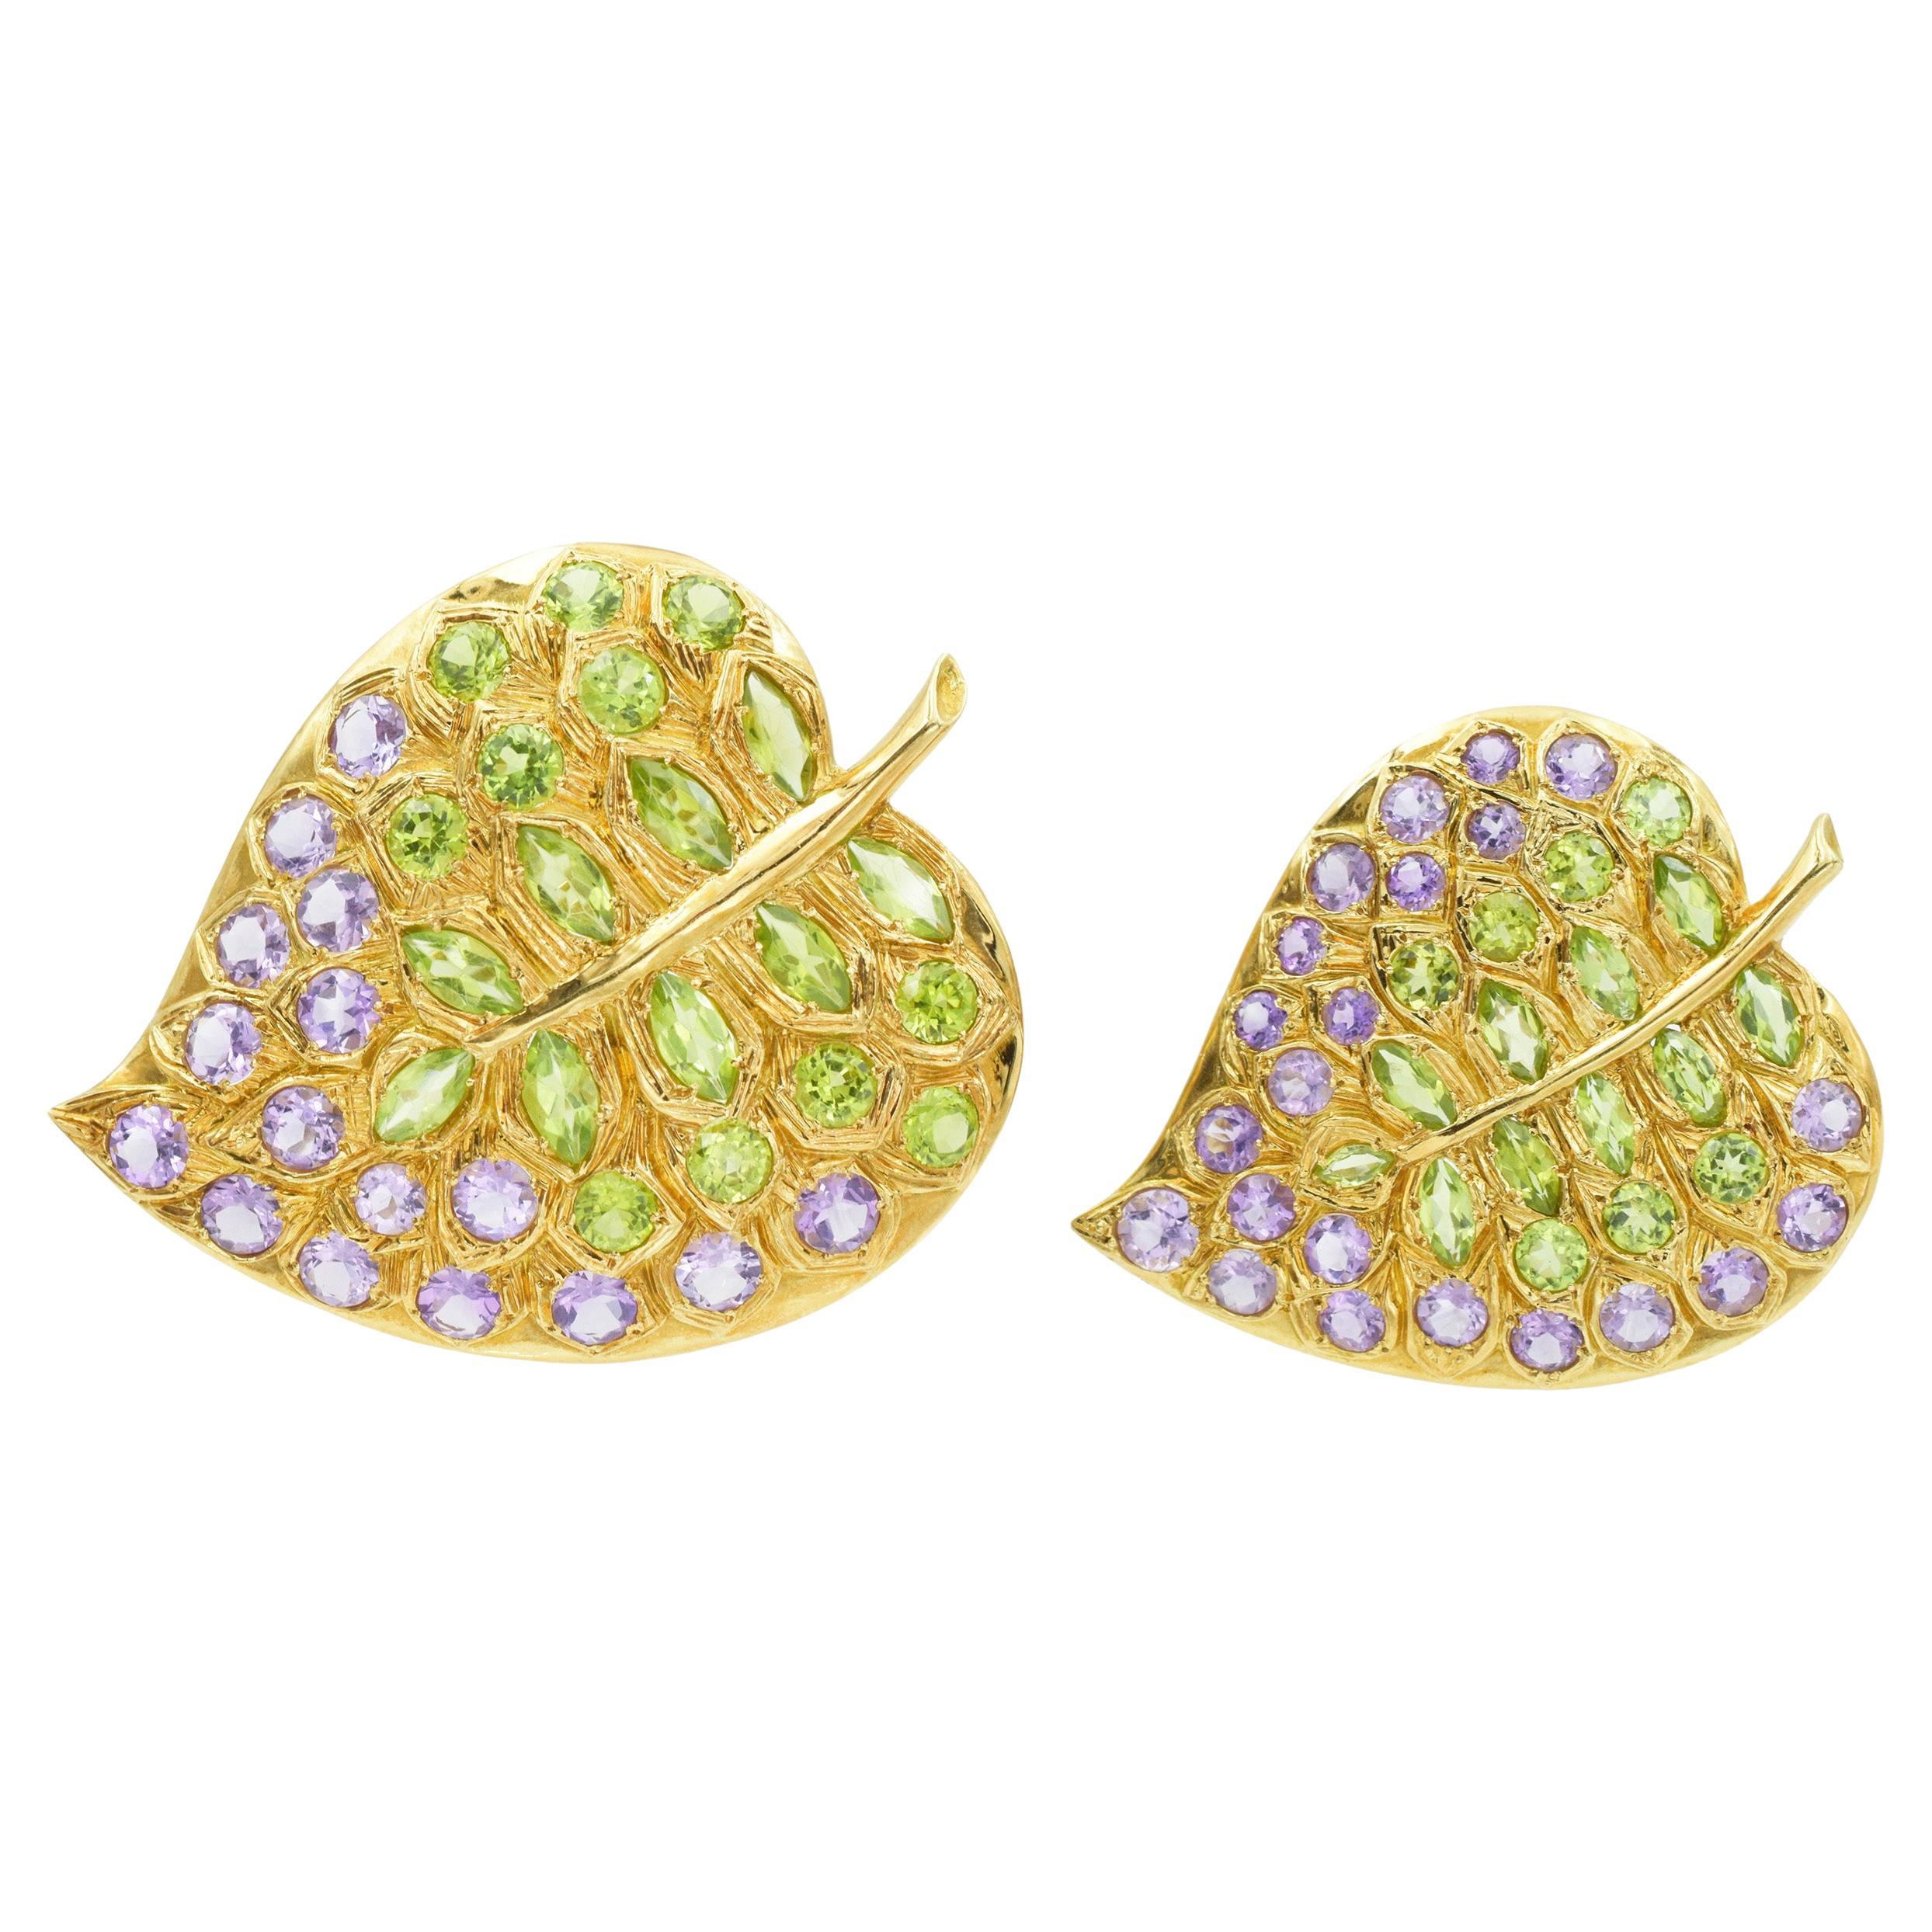 Pair of Amethyst and Peridot Leaf Brooches For Sale